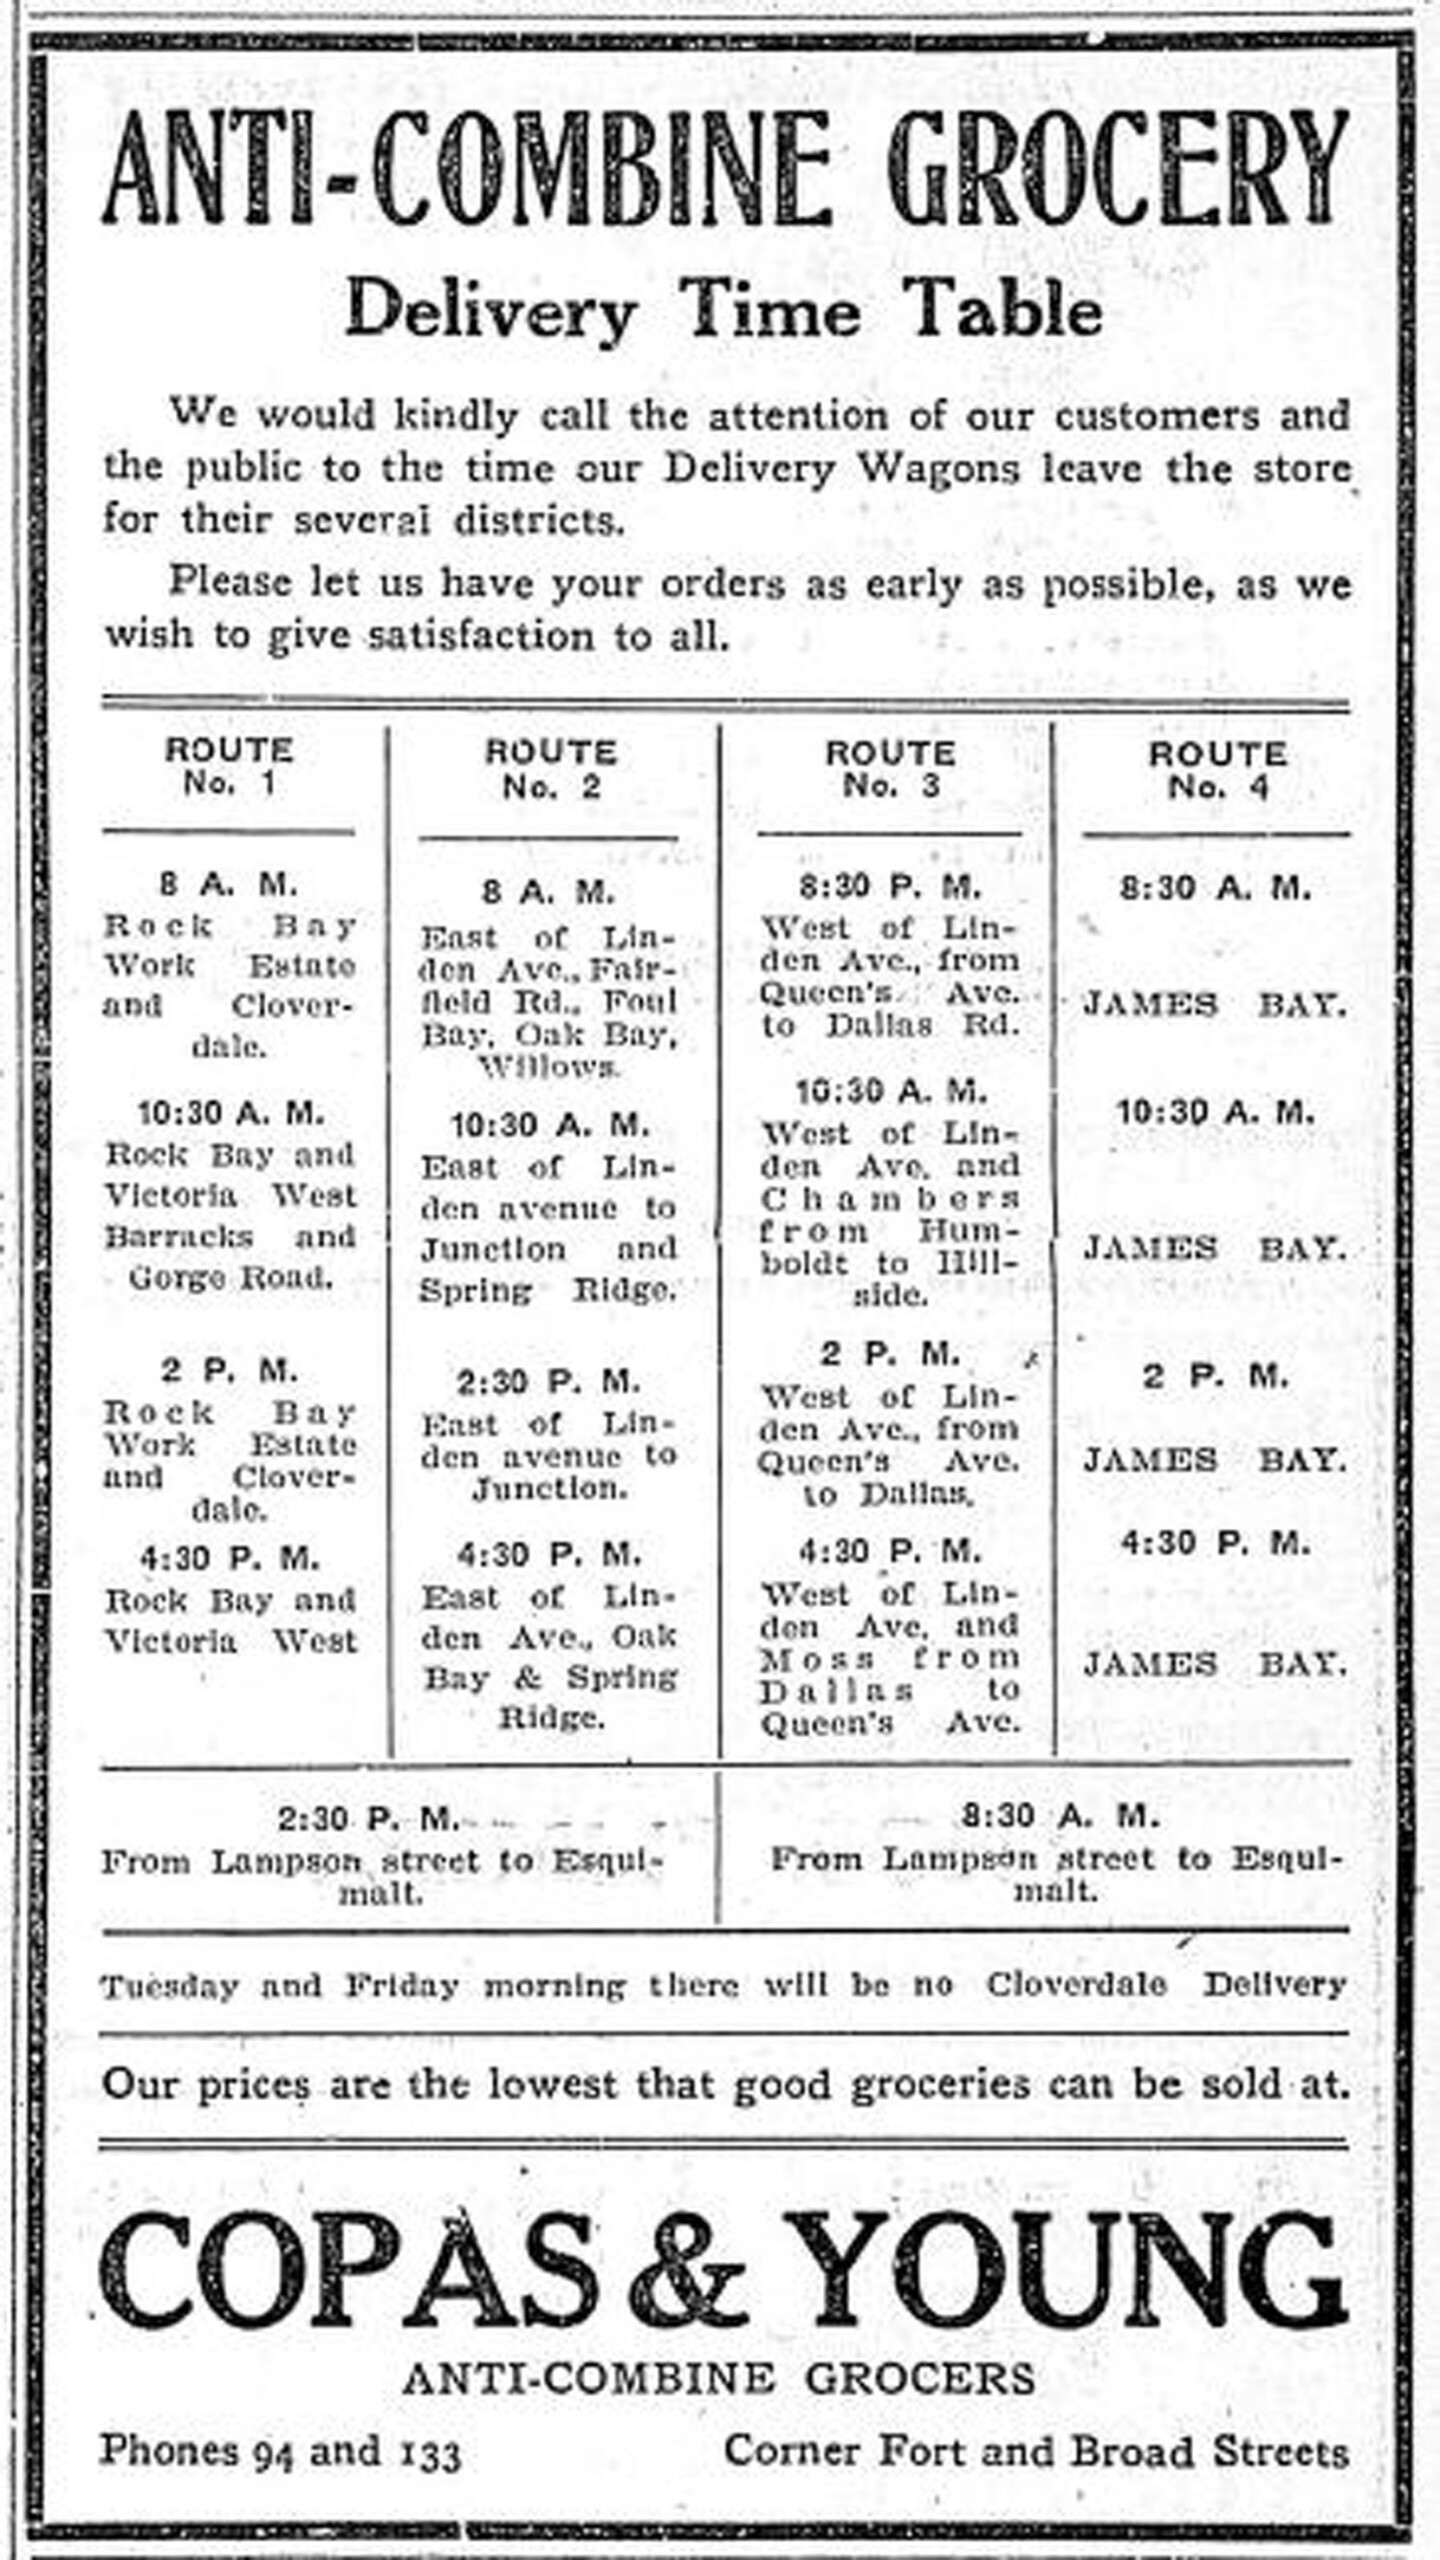 Copas & Young Anti-Combine Grocers, advertisement with grocery delivery schedules, 1909. Copas & Young was in the Fell Building at the intersection of Fort Street and Broad Street (Victoria Online Sightseeing collection)